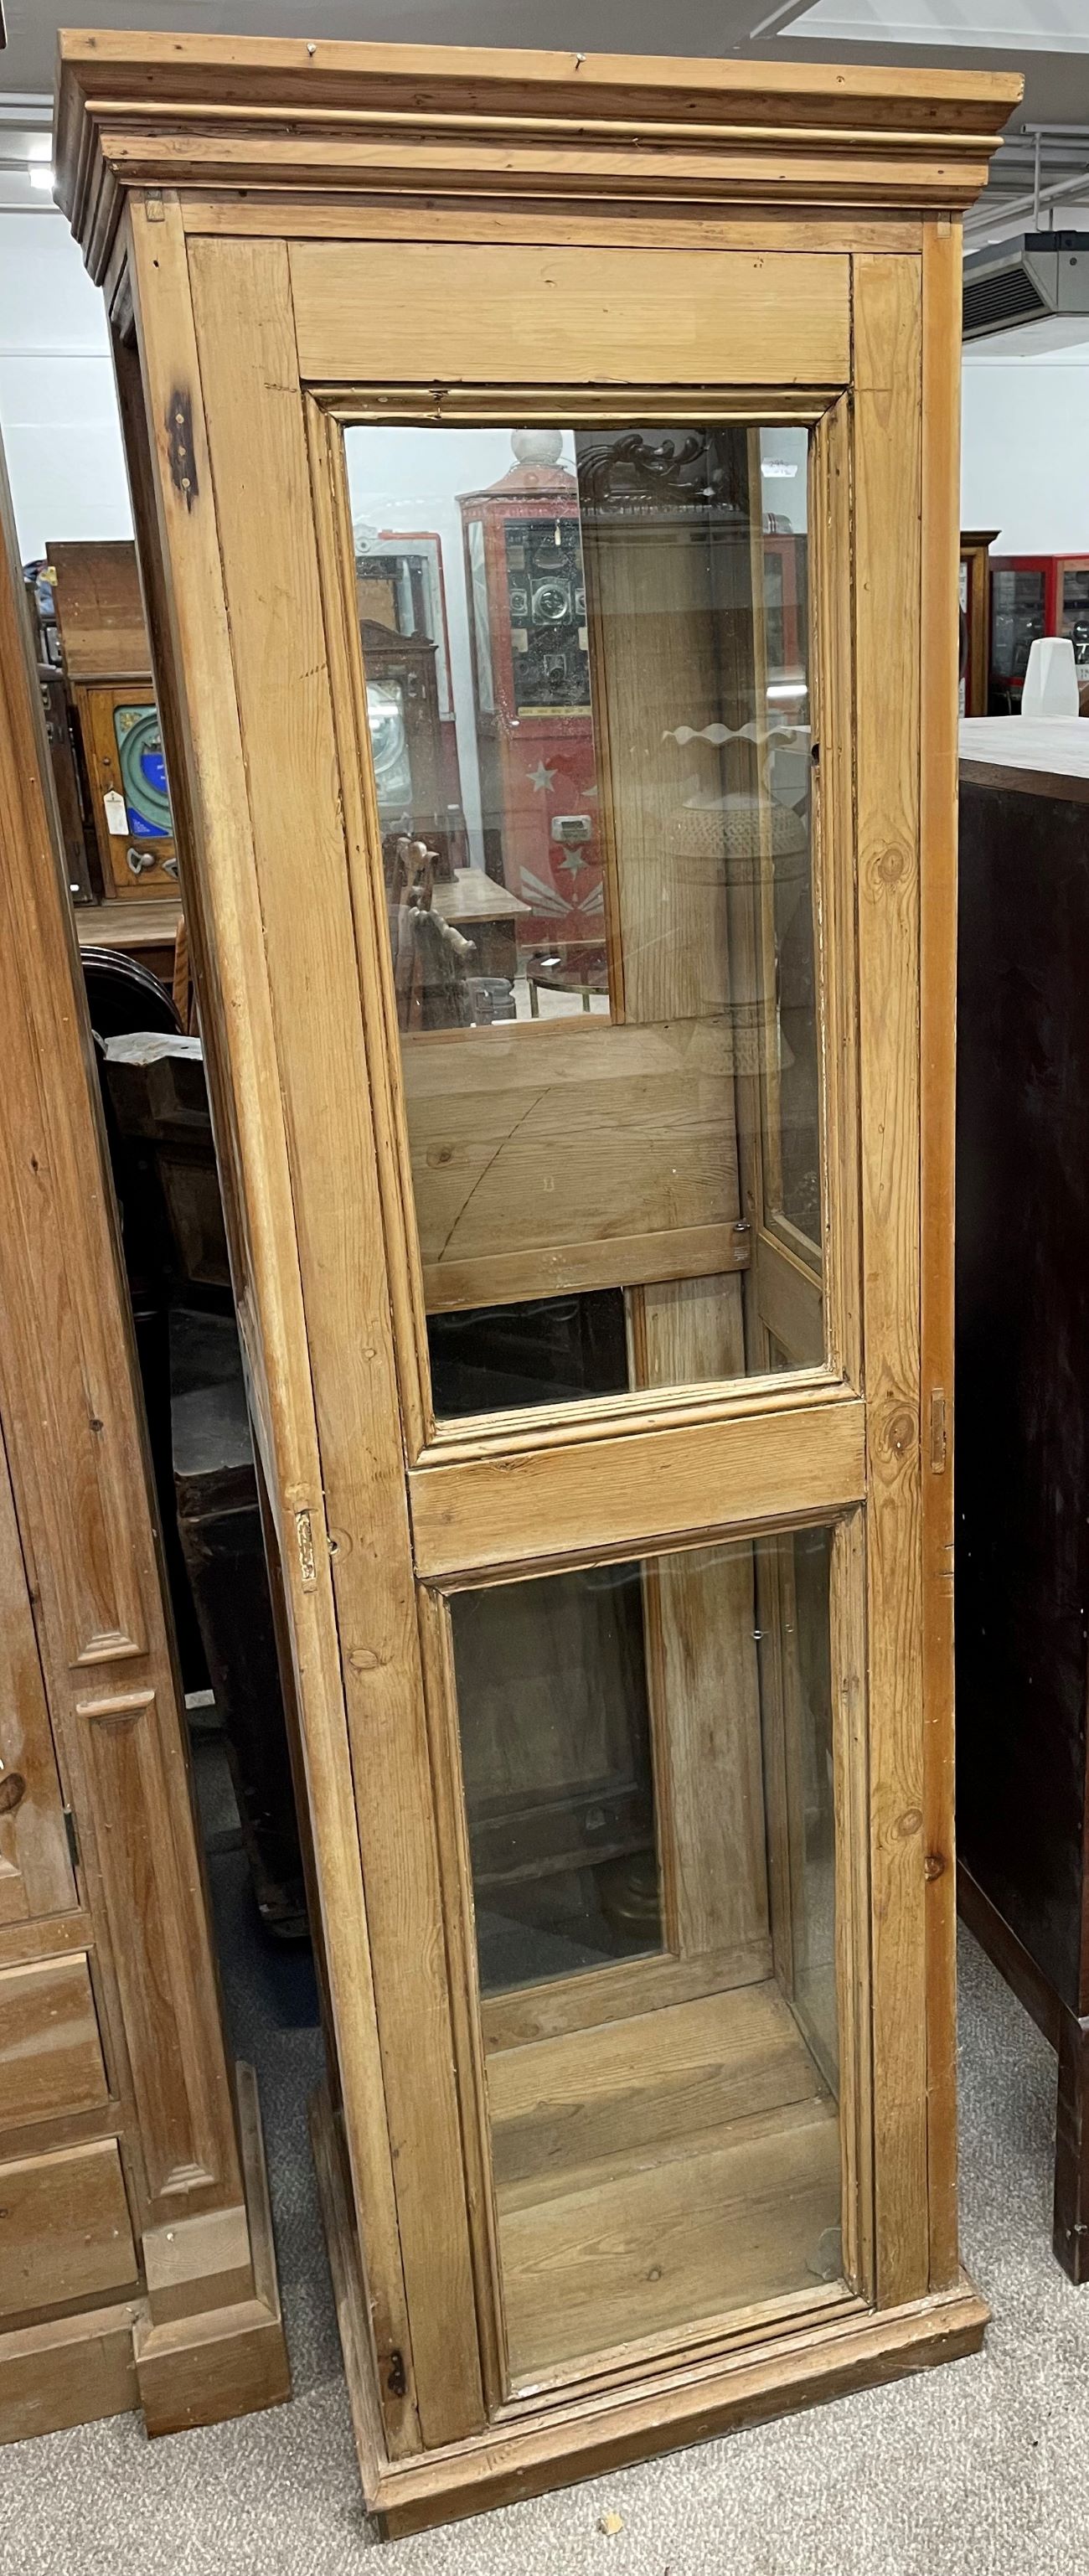 Stripped pine display cabinet (missing shelves) Ht 190cm W 60cm